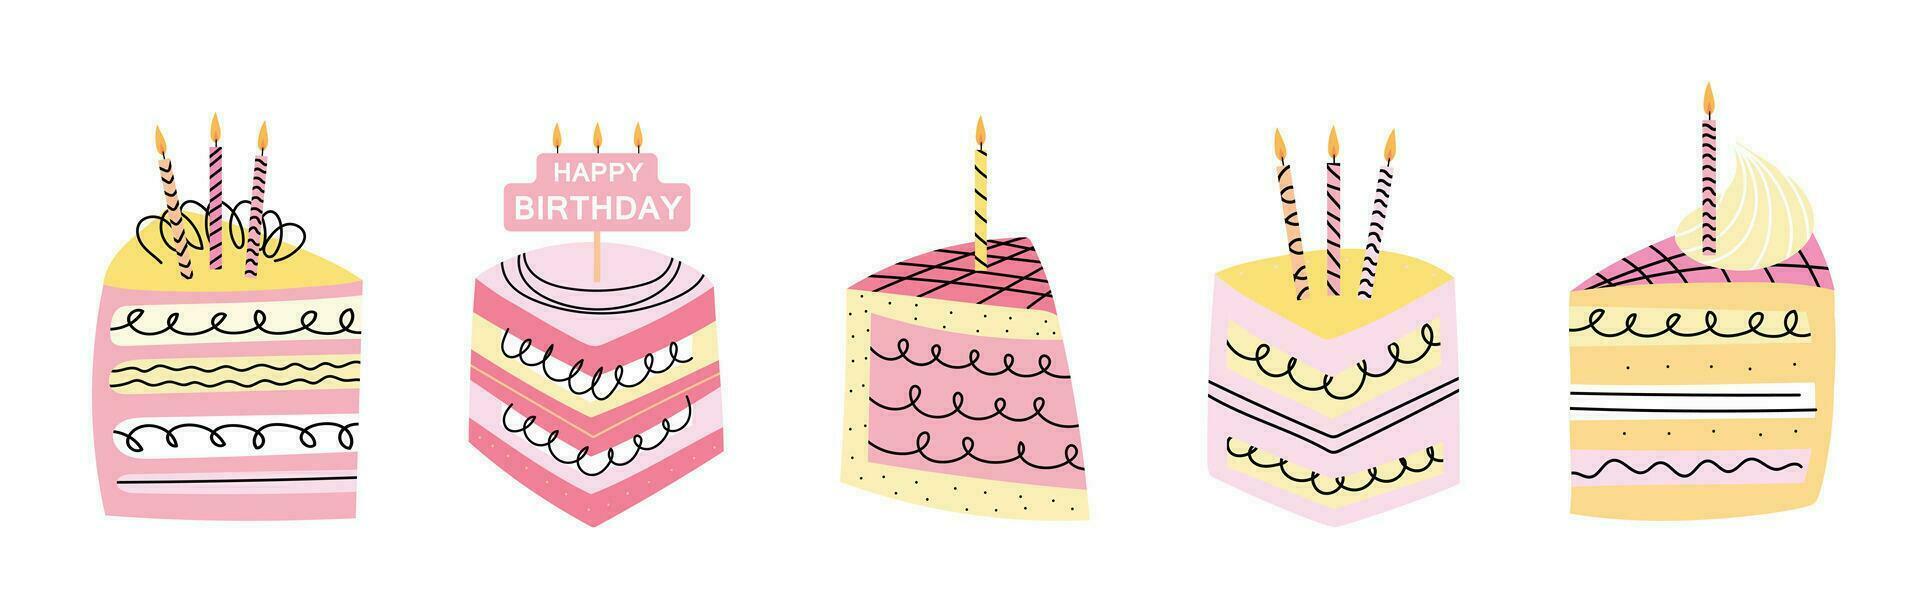 Hand drawn set of pink pieces of cakes and candles isolated on white background. Set of decorative slices of cakes. Vector design elements for postcards, stickers, label, logo and etc.